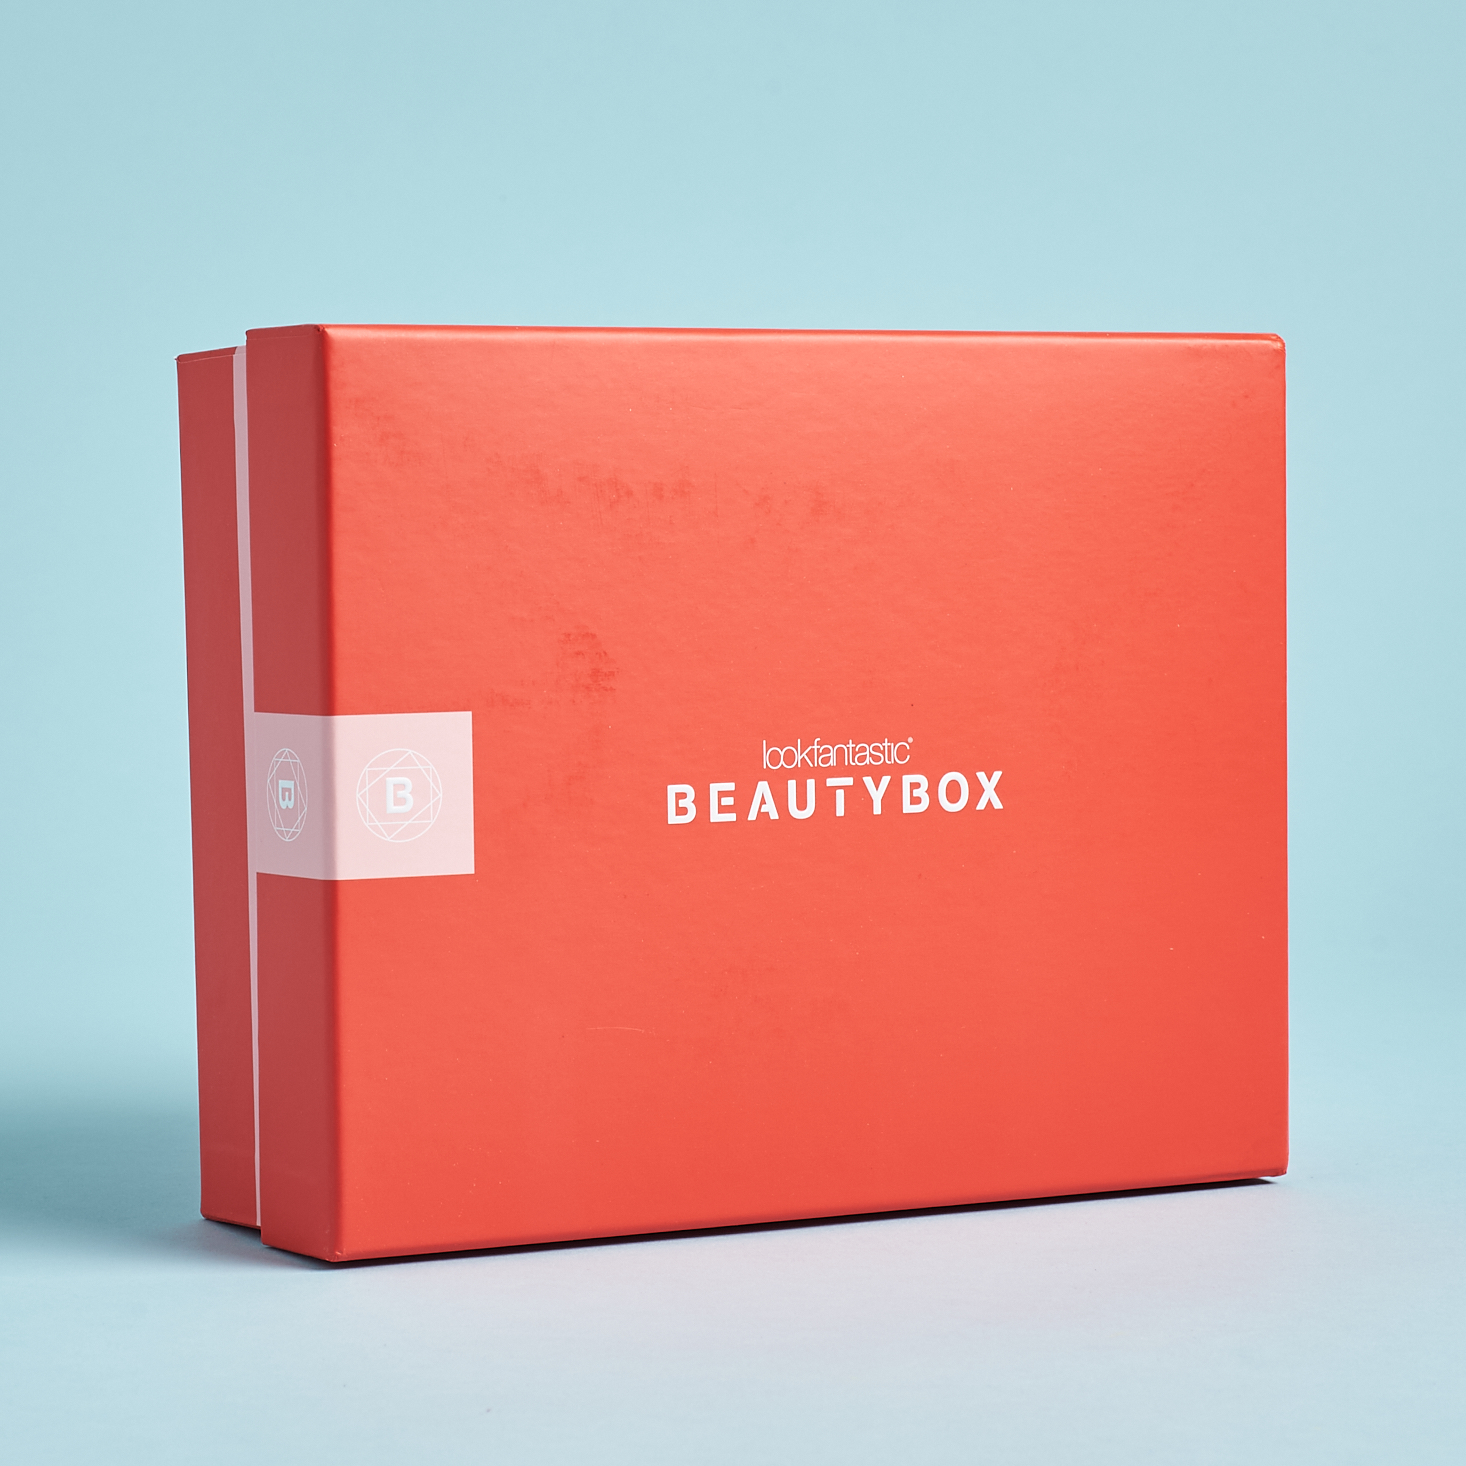 Look Fantastic Beauty Box Review – August 2020